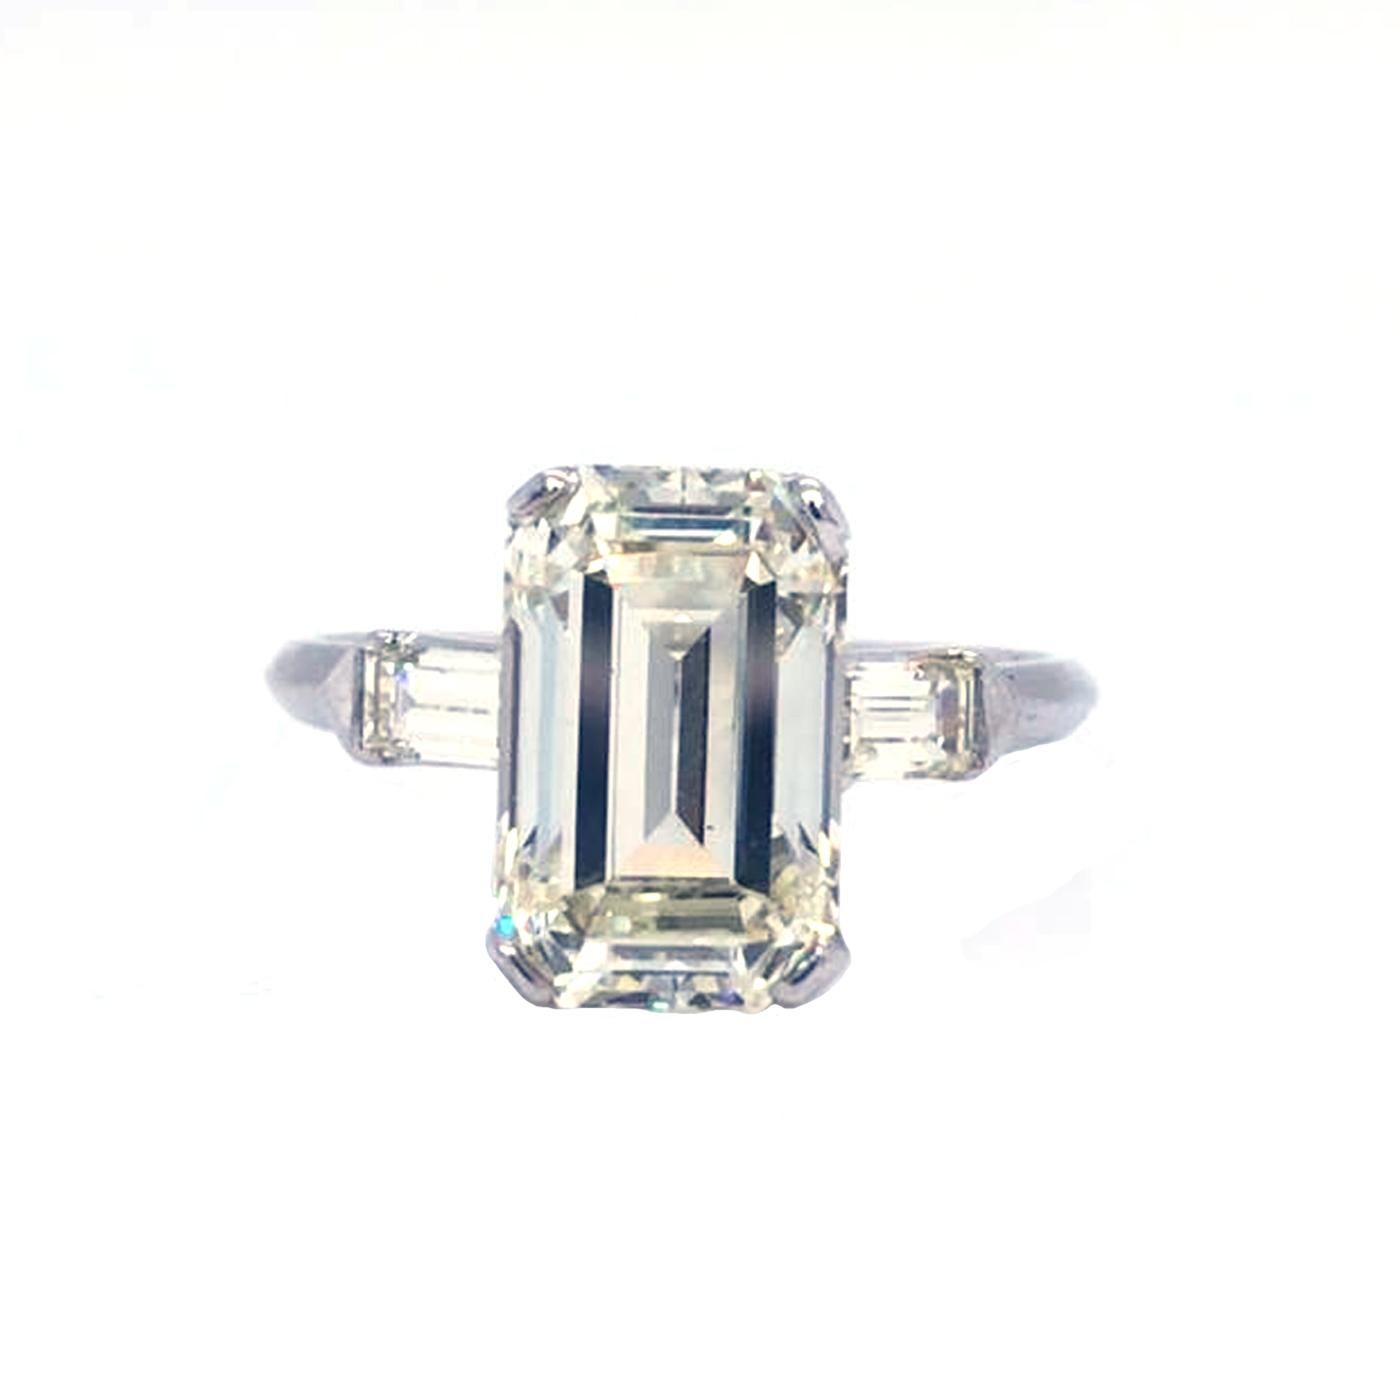 Classic Platinum Diamond ring 4.57 Carat center Emerald Cut Diamond   L - Color, VS1  Clarity, 11.91mm-7.52mm-5.44mm and accented by two Emerald cut diamonds, Totaling 0.56 carat J color, VS1 - Clarity, The ring weighs 4.5 grams, and is currently